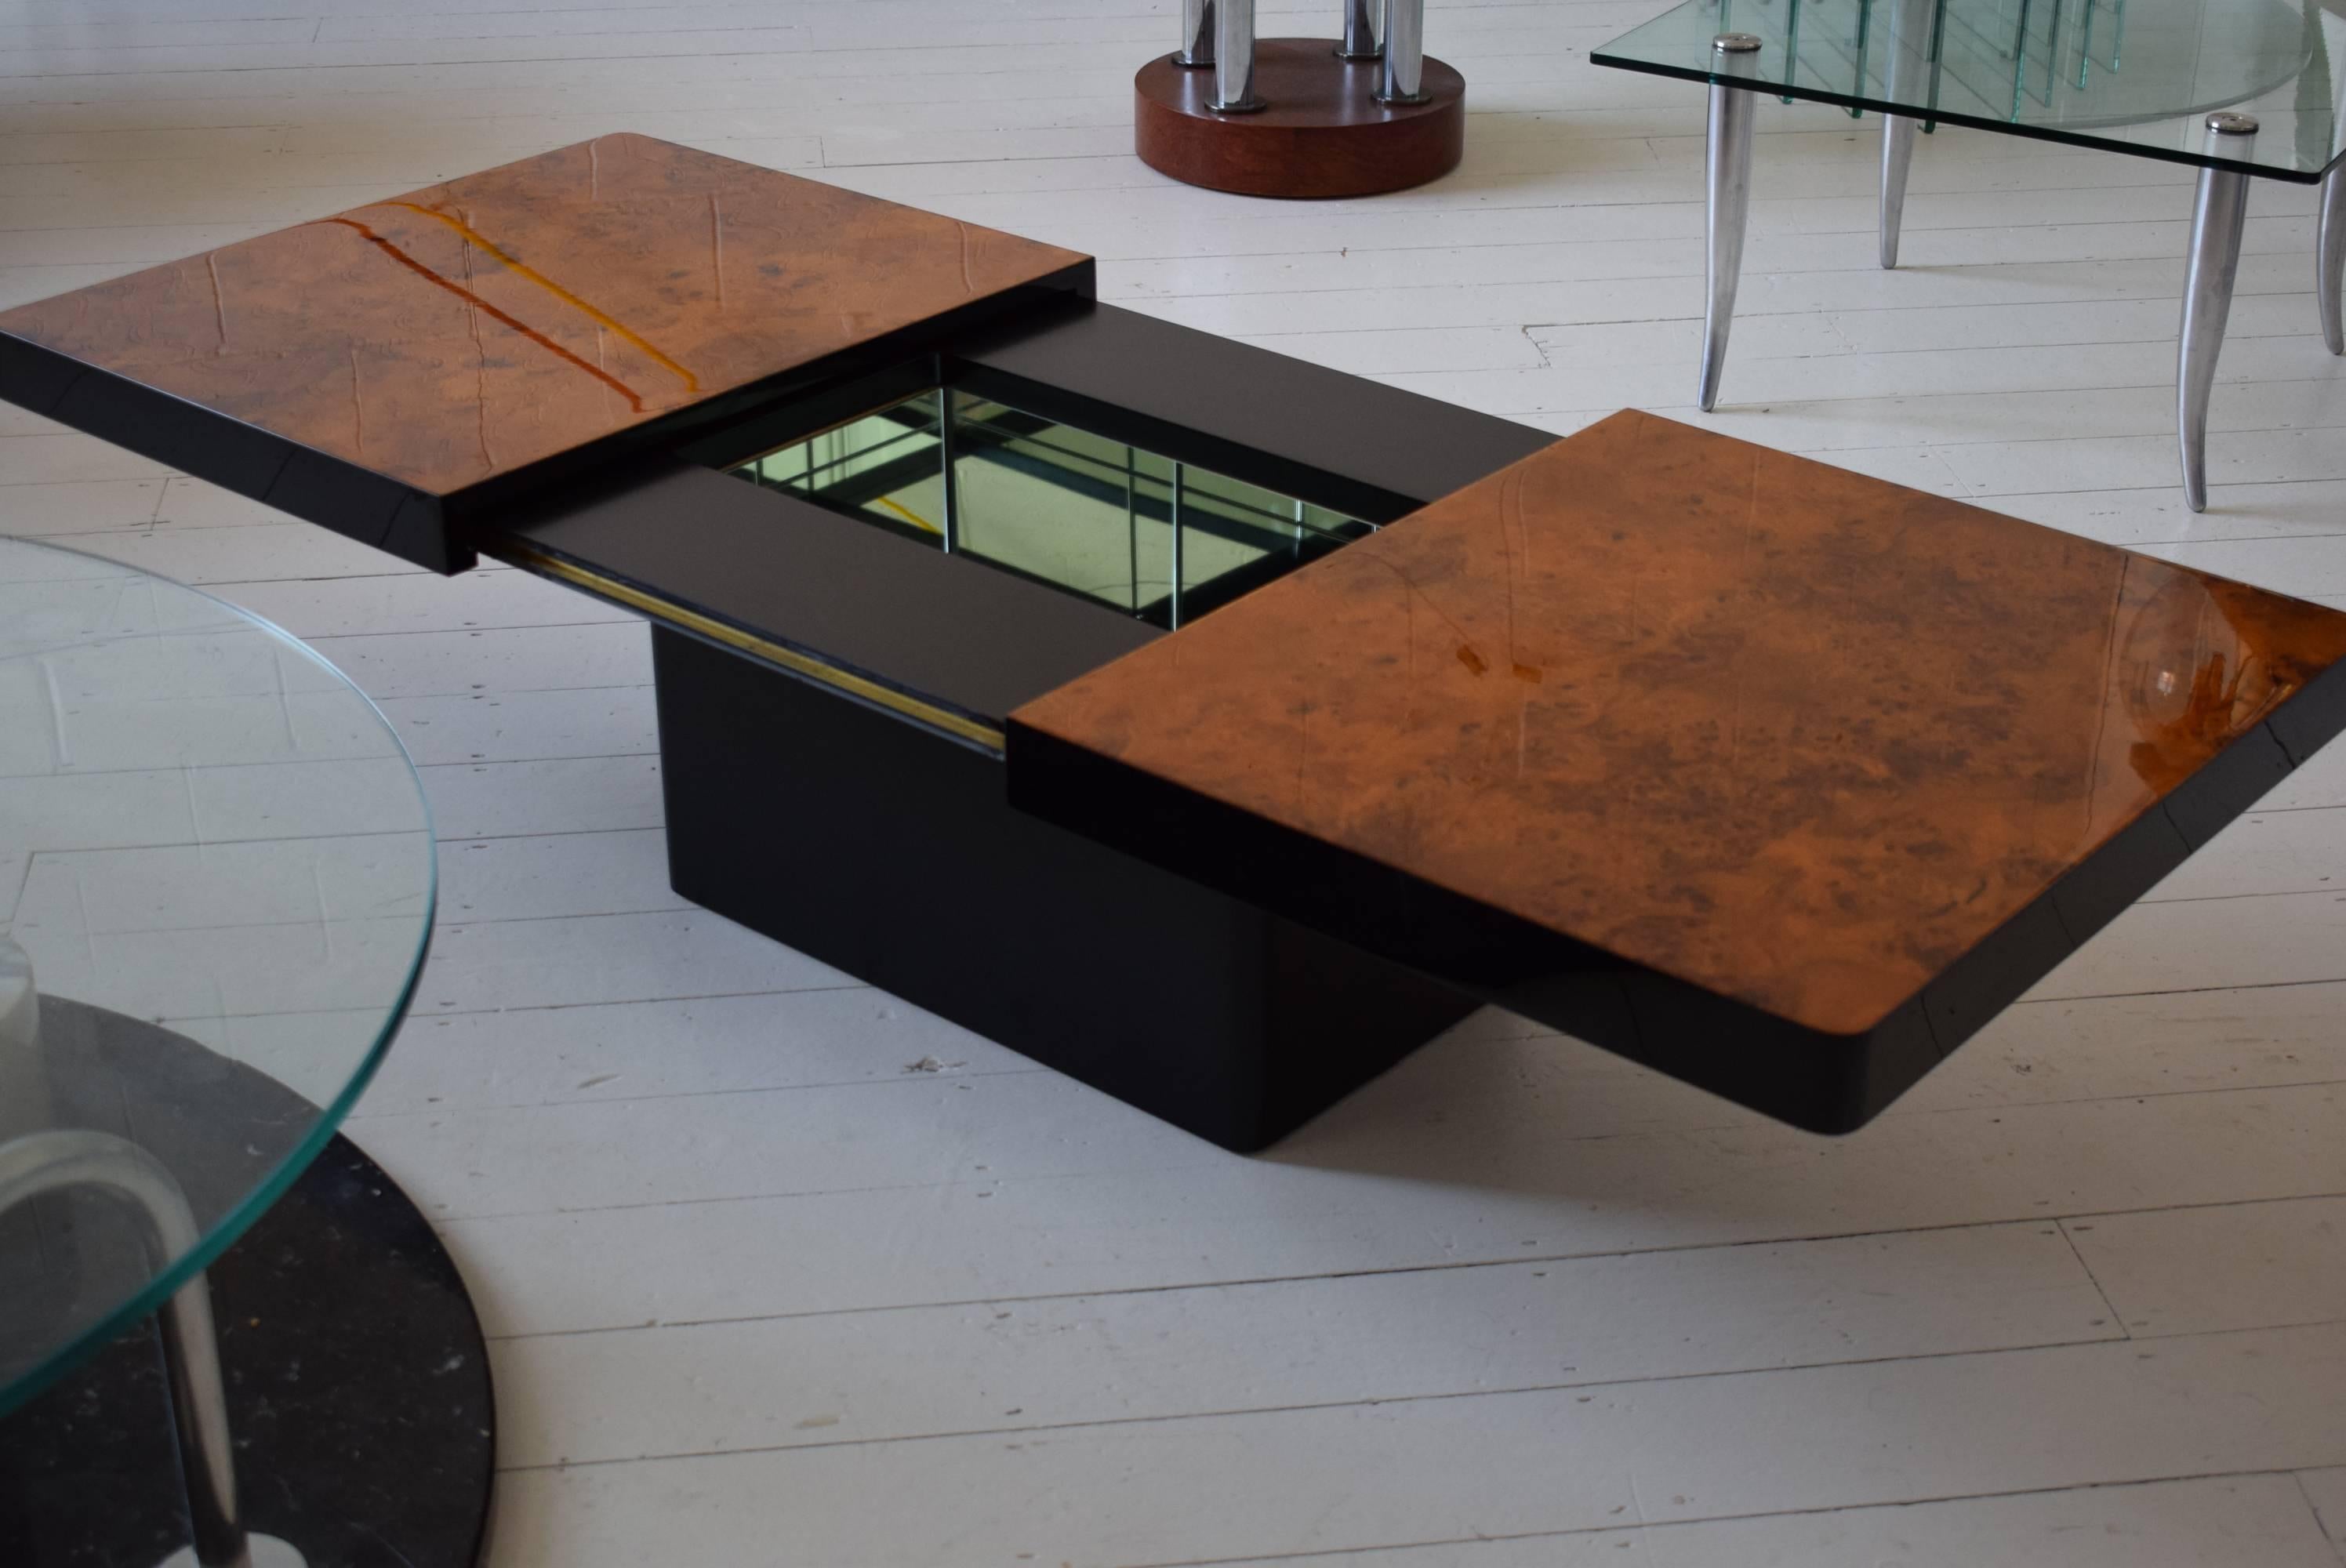 Beautiful 1970s Italian coffee or cocktail table with high gloss extendable burl walnut top, black lacquered body and internal mirrored dry bar. Lovely brass runners.

Please message us directly for a global shipping quote.